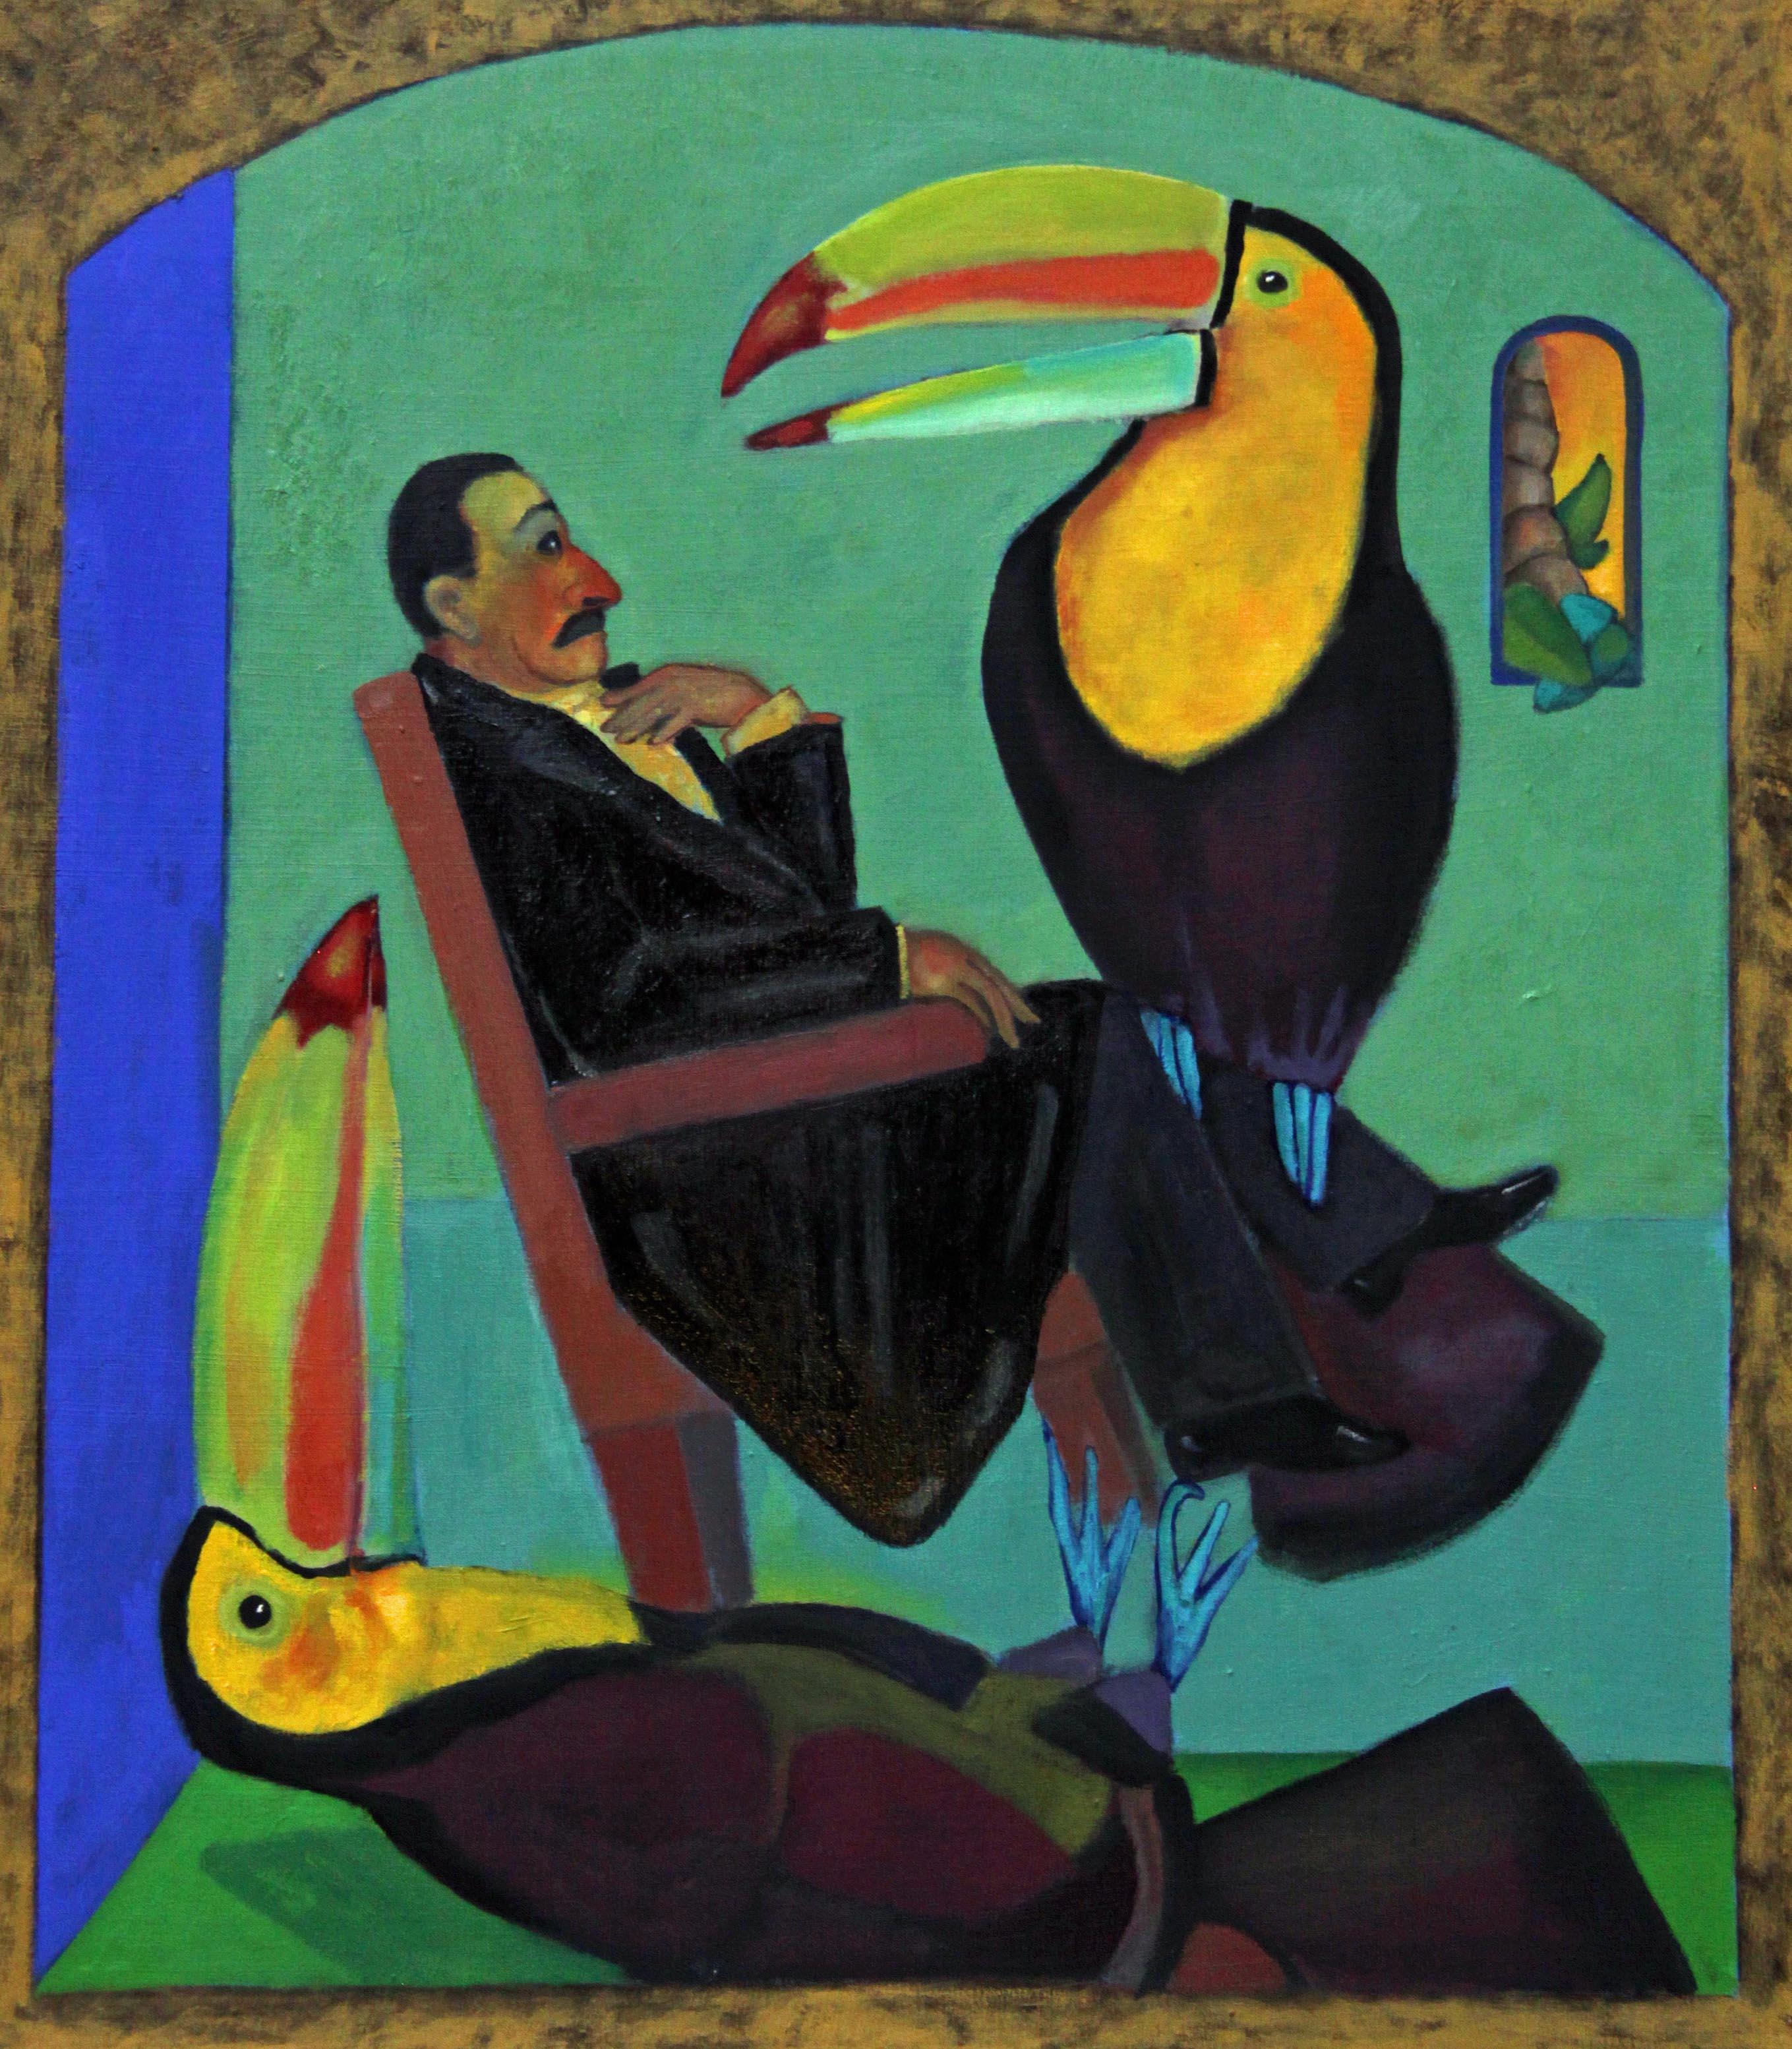 X Acrobats  colorful tropical theme toucan birds humorous imagery expressive - Painting by Stephen Basso